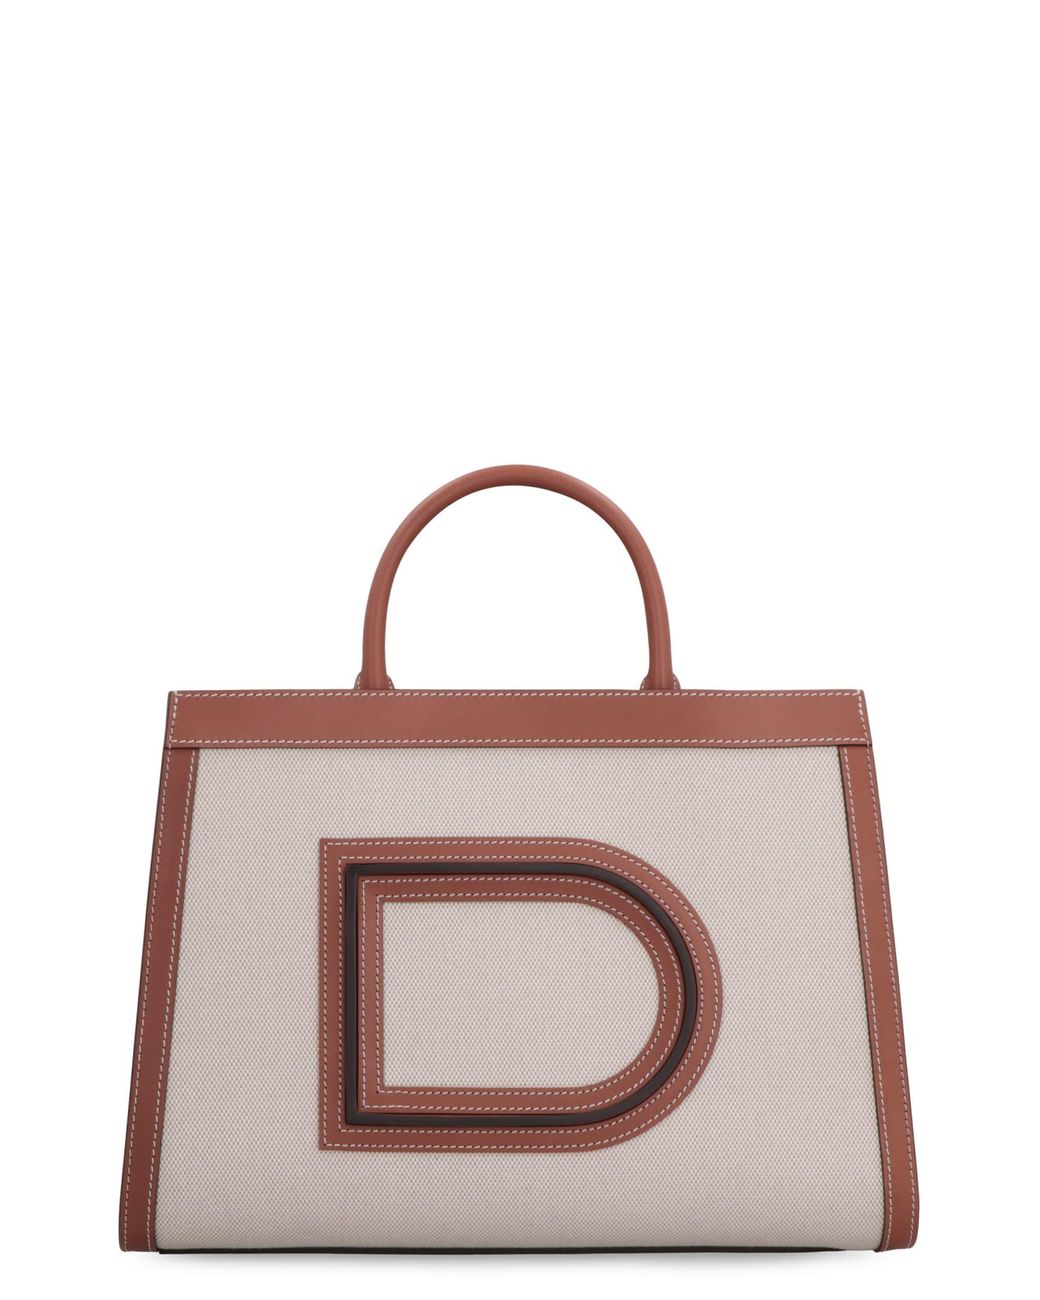 Delvaux Frame Pm Canvas Tote Bag | Lyst